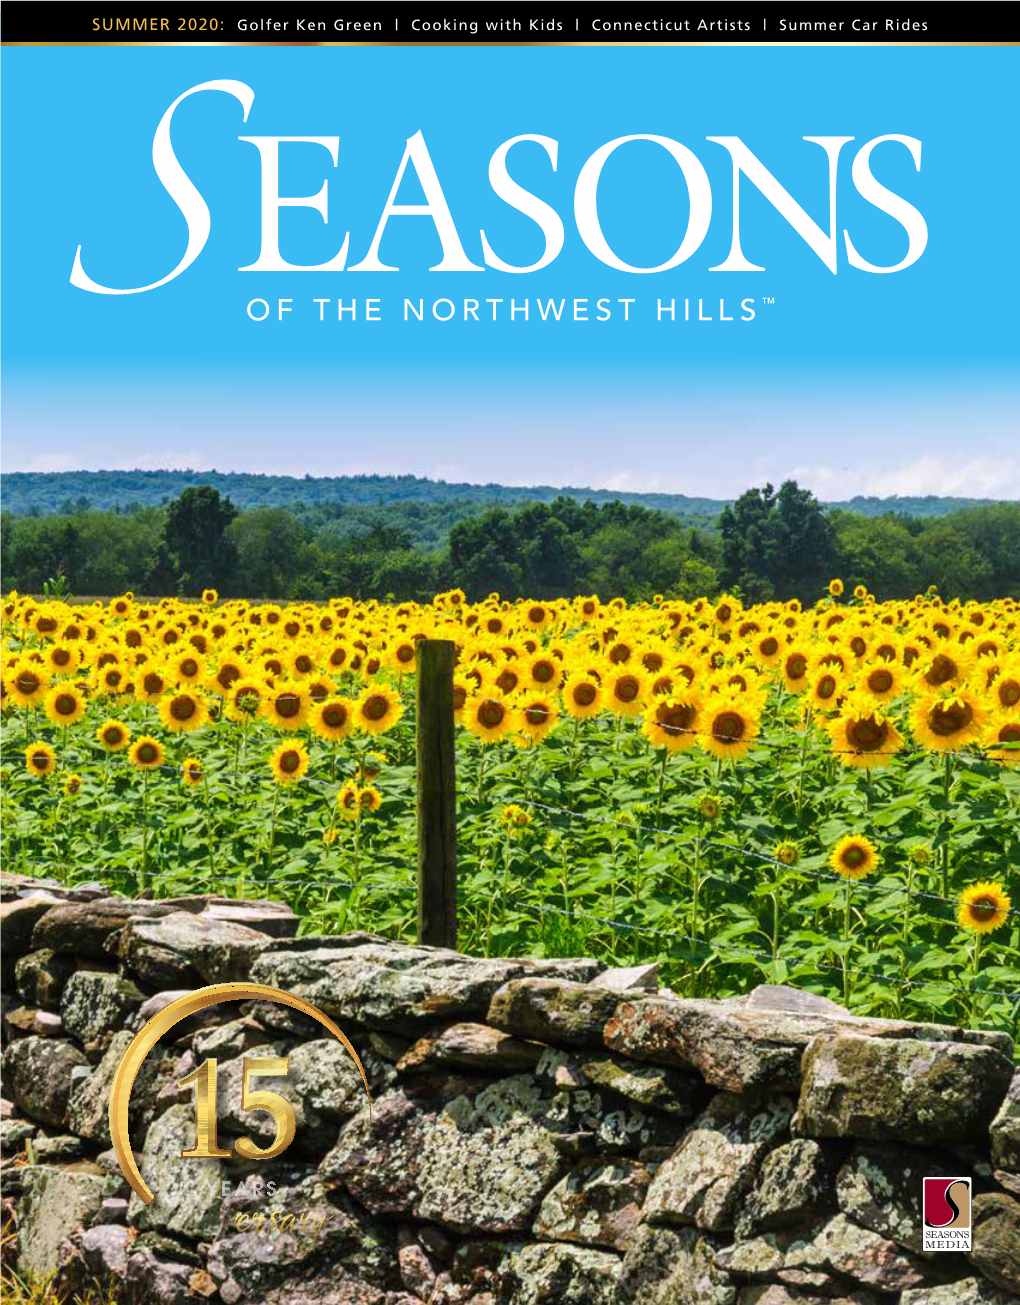 Of the Northwest Hills™ Is Published by Seasons Magazines at Seasons Magazines, We Are Grateful to Have Weathered the Storm James P